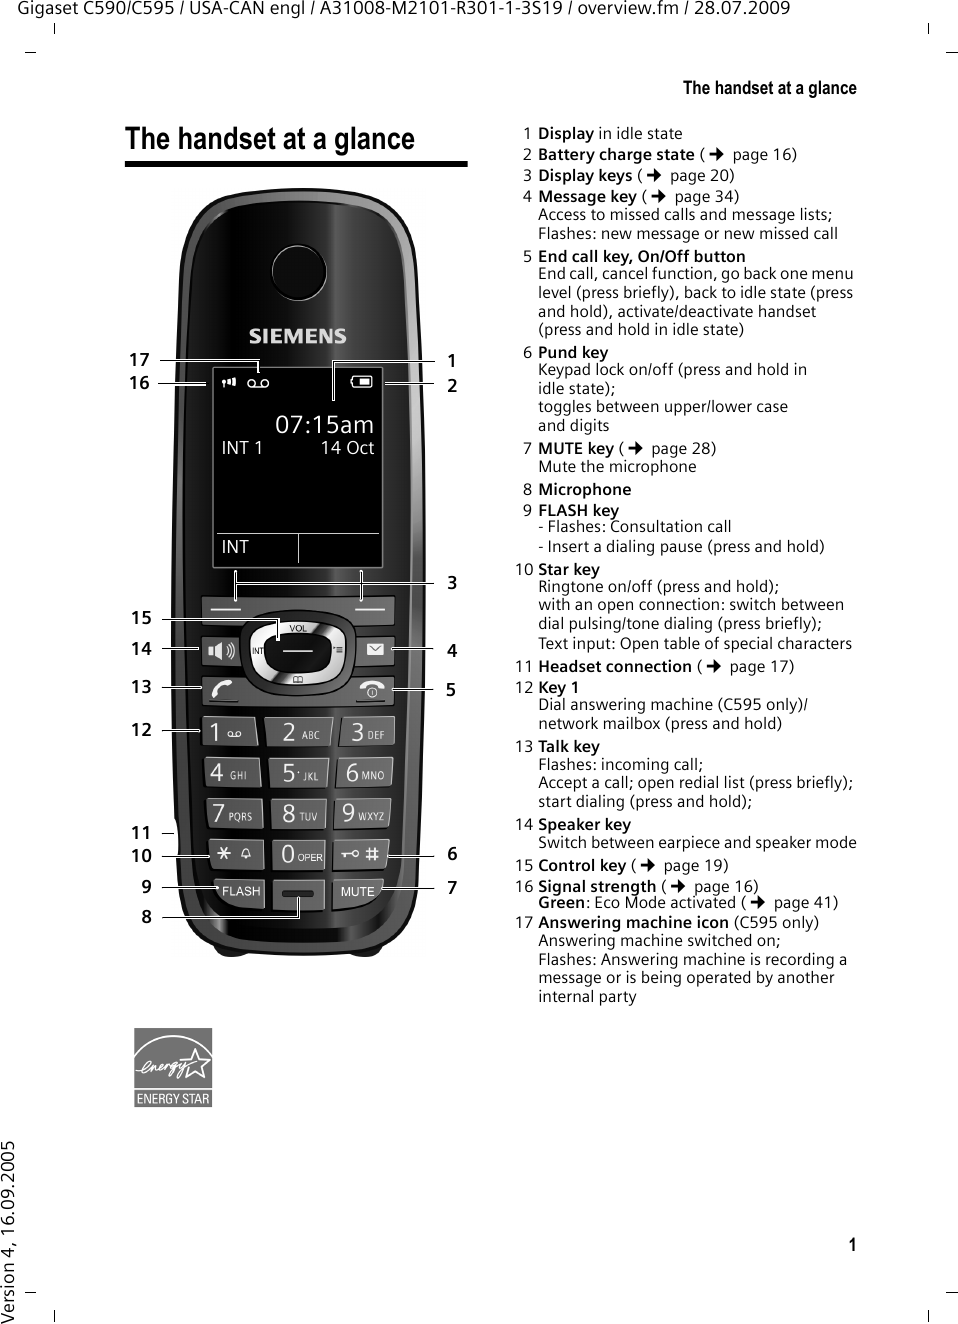 1The handset at a glanceGigaset C590/C595 / USA-CAN engl / A31008-M2101-R301-1-3S19 / overview.fm / 28.07.2009Version 4, 16.09.2005The handset at a glance 1Display in idle state2Battery charge state (¢page 16) 3Display keys (¢page 20)4Message key (¢page 34)Access to missed calls and message lists;Flashes: new message or new missed call5End call key, On/Off button End call, cancel function, go back one menu level (press briefly), back to idle state (press and hold), activate/deactivate handset (press and hold in idle state)6Pund key Keypad lock on/off (press and hold in idle state);toggles between upper/lower case and digits7MUTE key (¢page 28)Mute the microphone8Microphone 9FLASH key - Flashes: Consultation call- Insert a dialing pause (press and hold)10 Star key Ringtone on/off (press and hold);with an open connection: switch between dial pulsing/tone dialing (press briefly);Text input: Open table of special characters11 Headset connection (¢page 17) 12 Key 1 Dial answering machine (C595 only)/network mailbox (press and hold)13 Talk key Flashes: incoming call;Accept a call; open redial list (press briefly); start dialing (press and hold); 14 Speaker key Switch between earpiece and speaker mode15 Control key (¢page 19)16 Signal strength (¢page 16)Green: Eco Mode activated (¢page 41)17 Answering machine icon (C595 only)Answering machine switched on;Flashes: Answering machine is recording a message or is being operated by another internal partyiÃ V07:15amINT 1  14 OctINT2354671513118114169101217